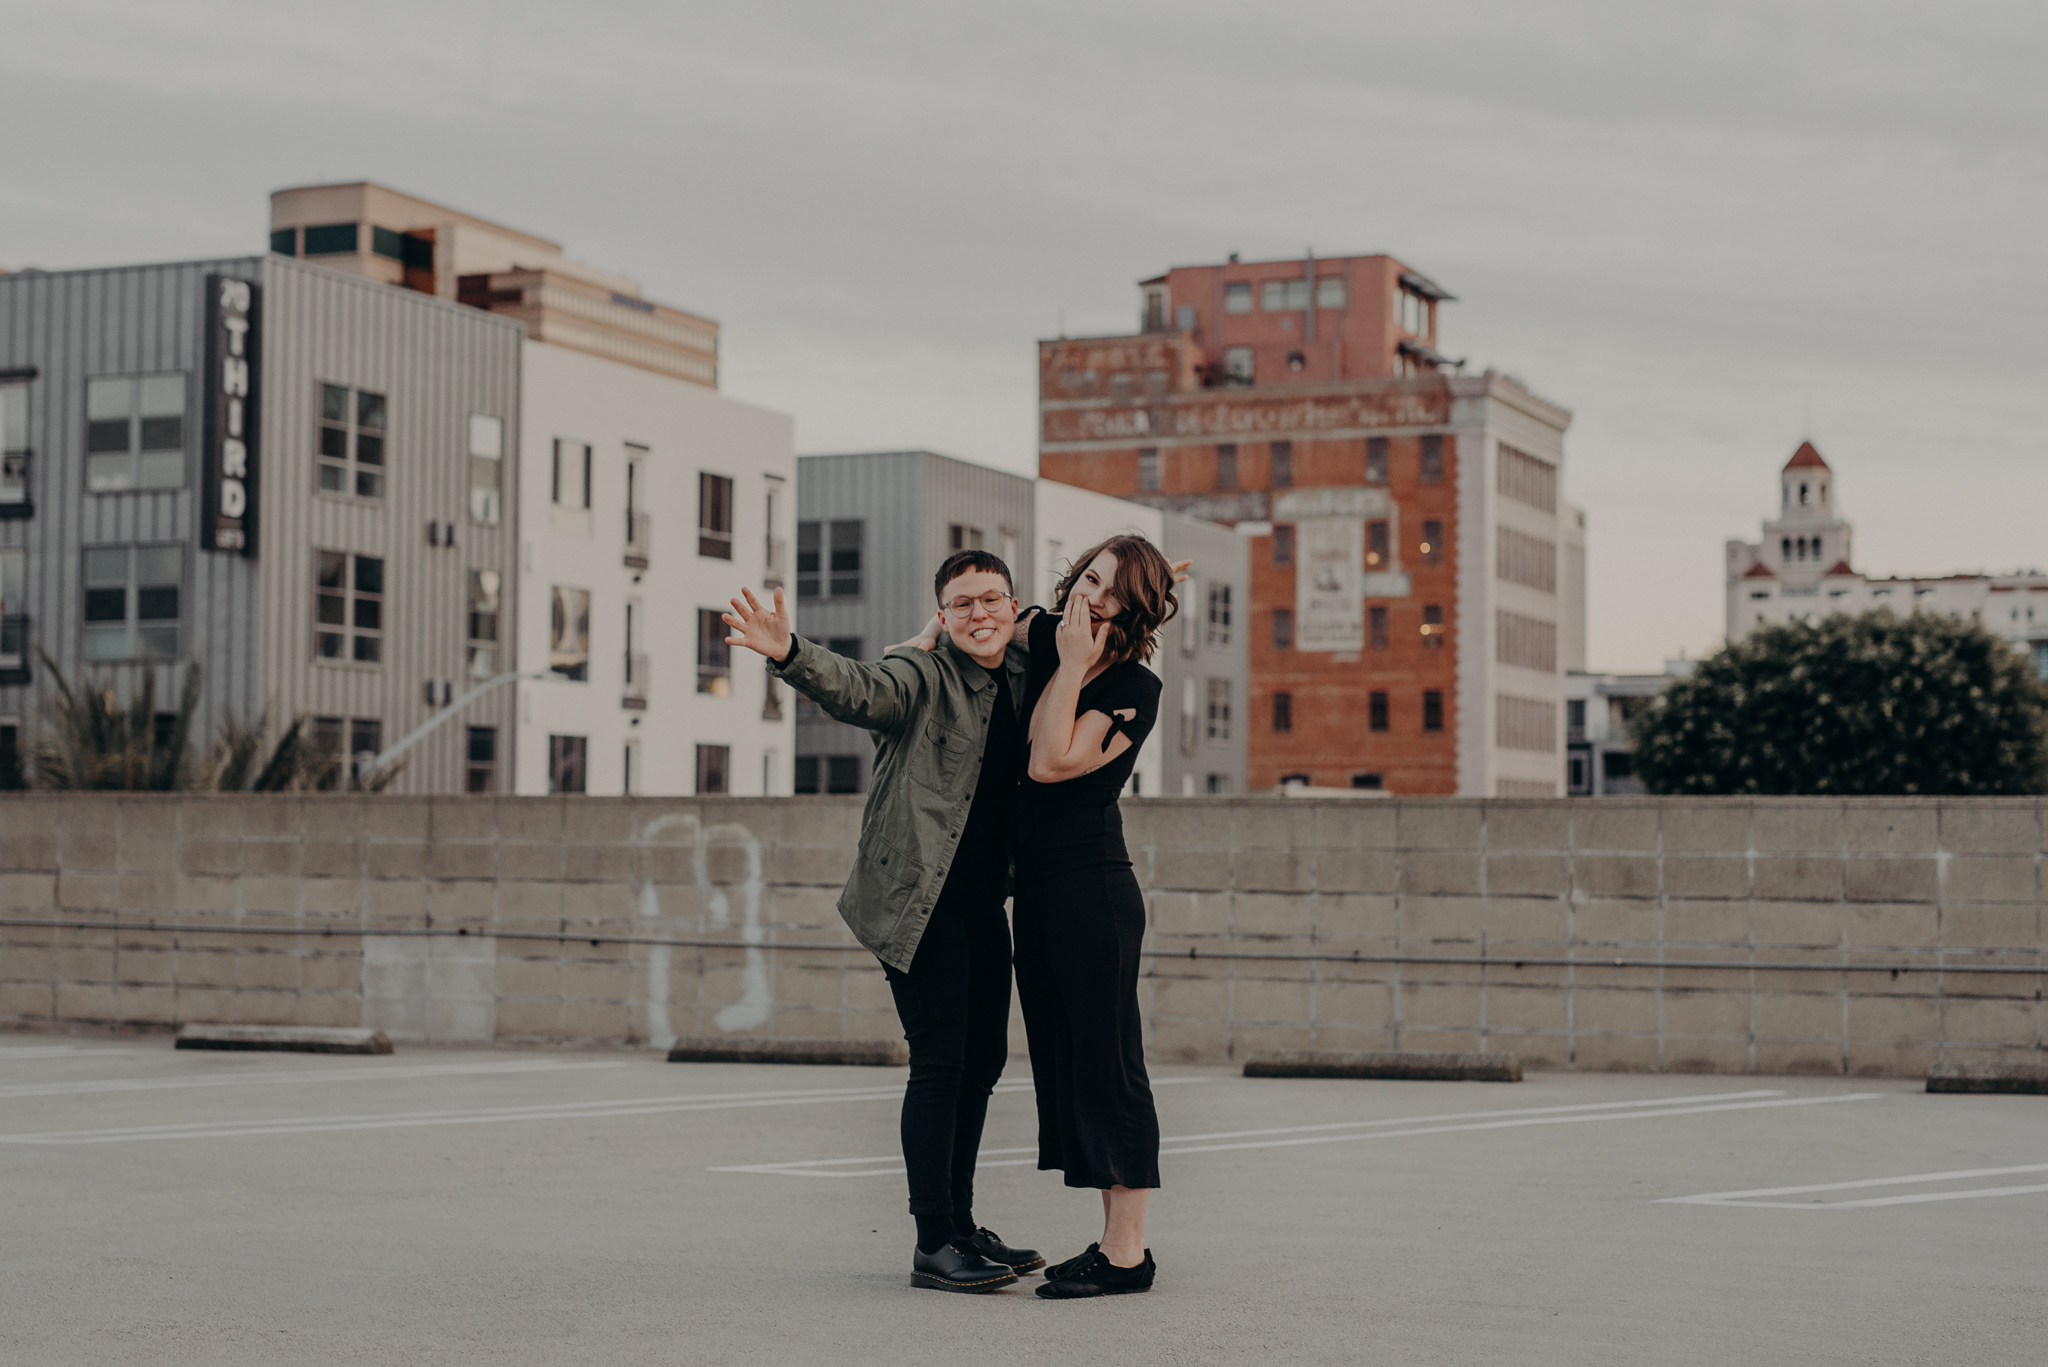 LGBTQ wedding photographer in los angeles - long beach engagement session - isaiahandtaylor.com-50.jpg